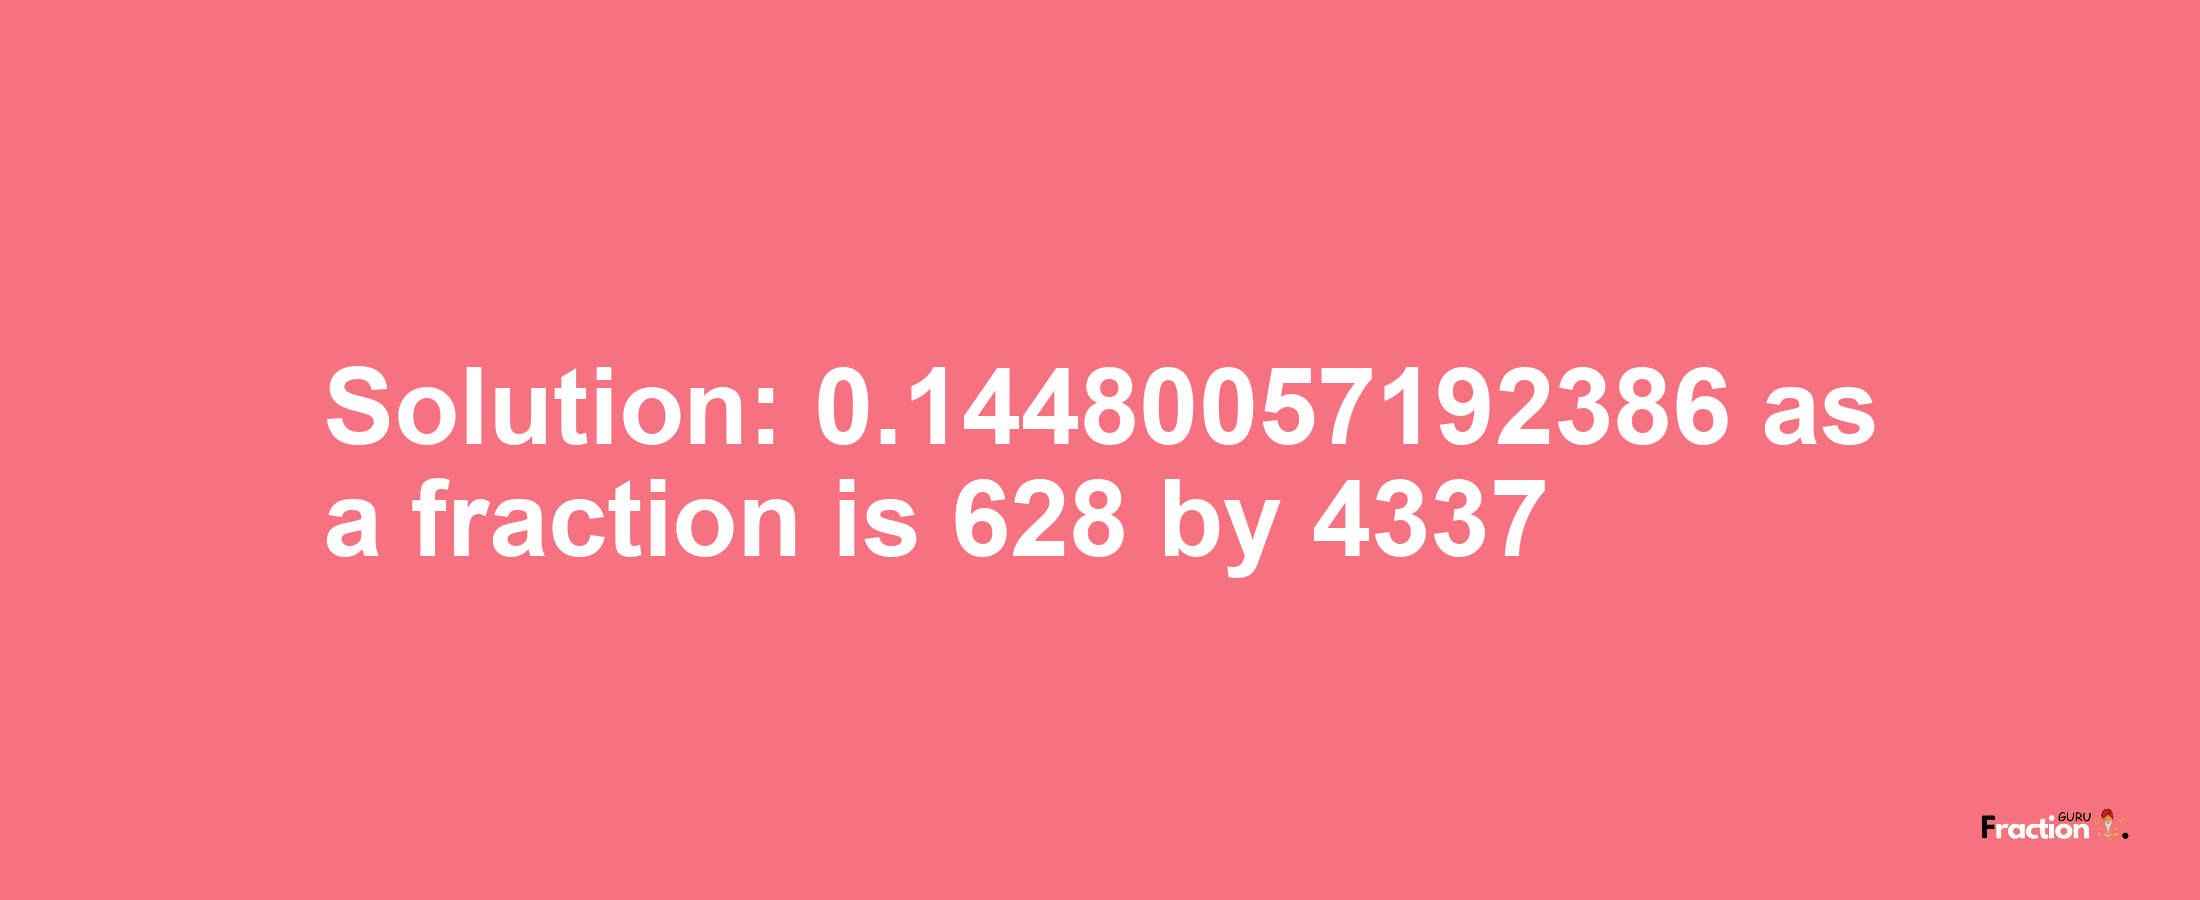 Solution:0.14480057192386 as a fraction is 628/4337